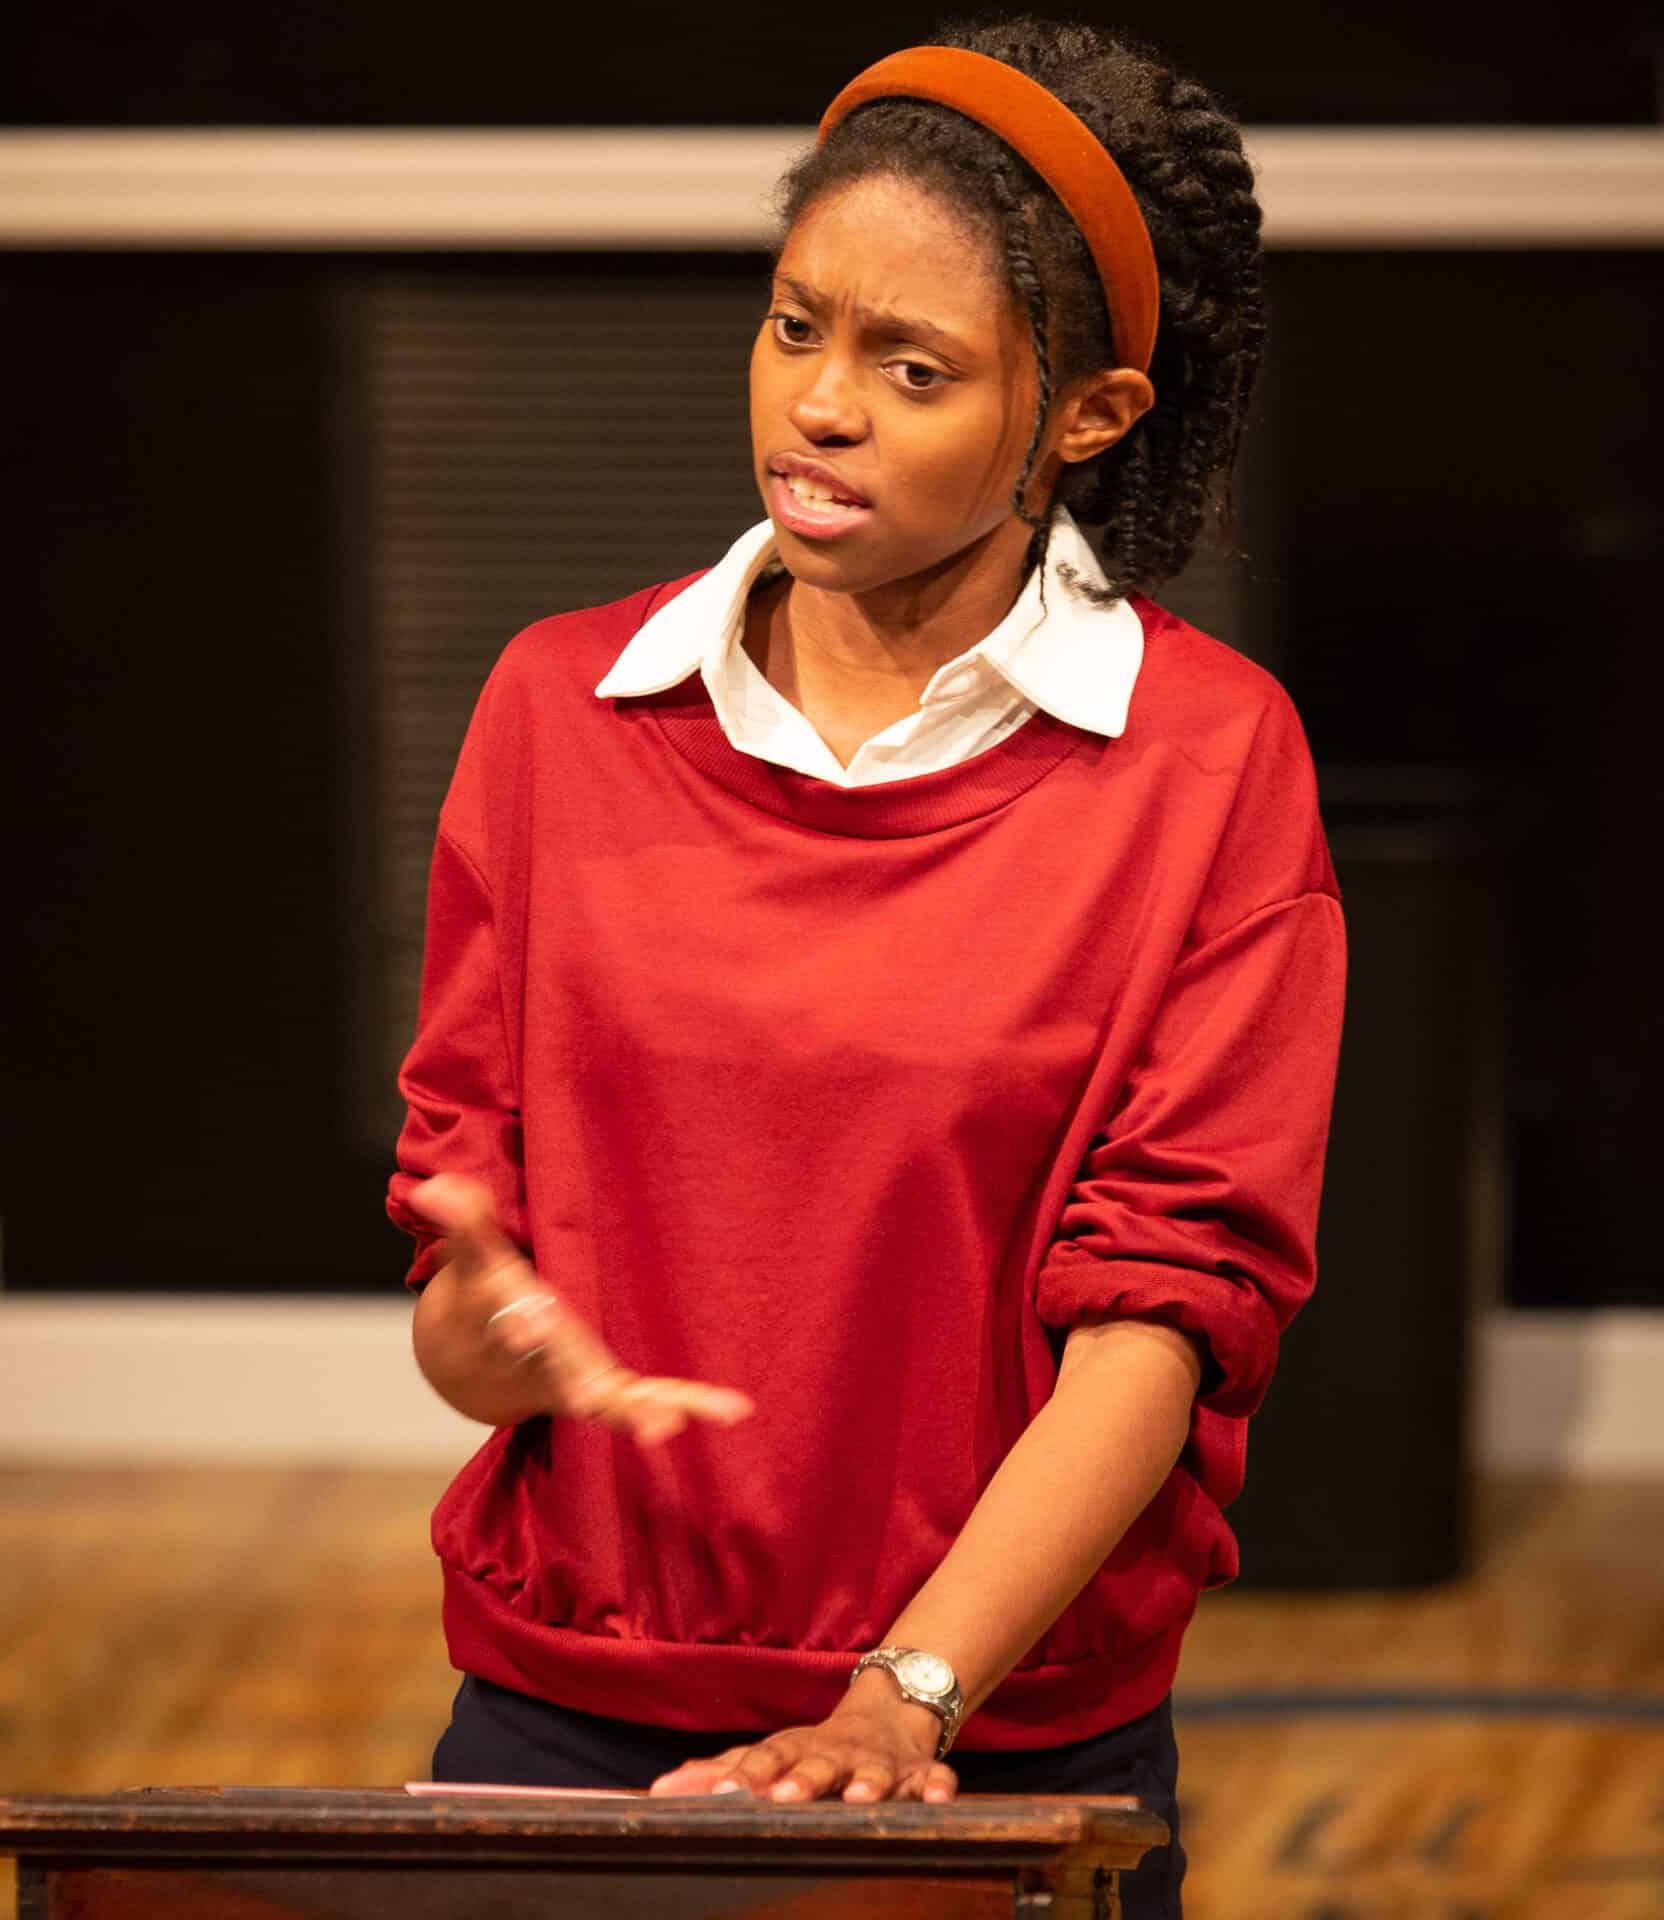 Zurie Adams speaks at a podium with serious confidence in WAM Theatre's production of What the Constitution Means to Me. Press photo courtesy of WAM Theatre